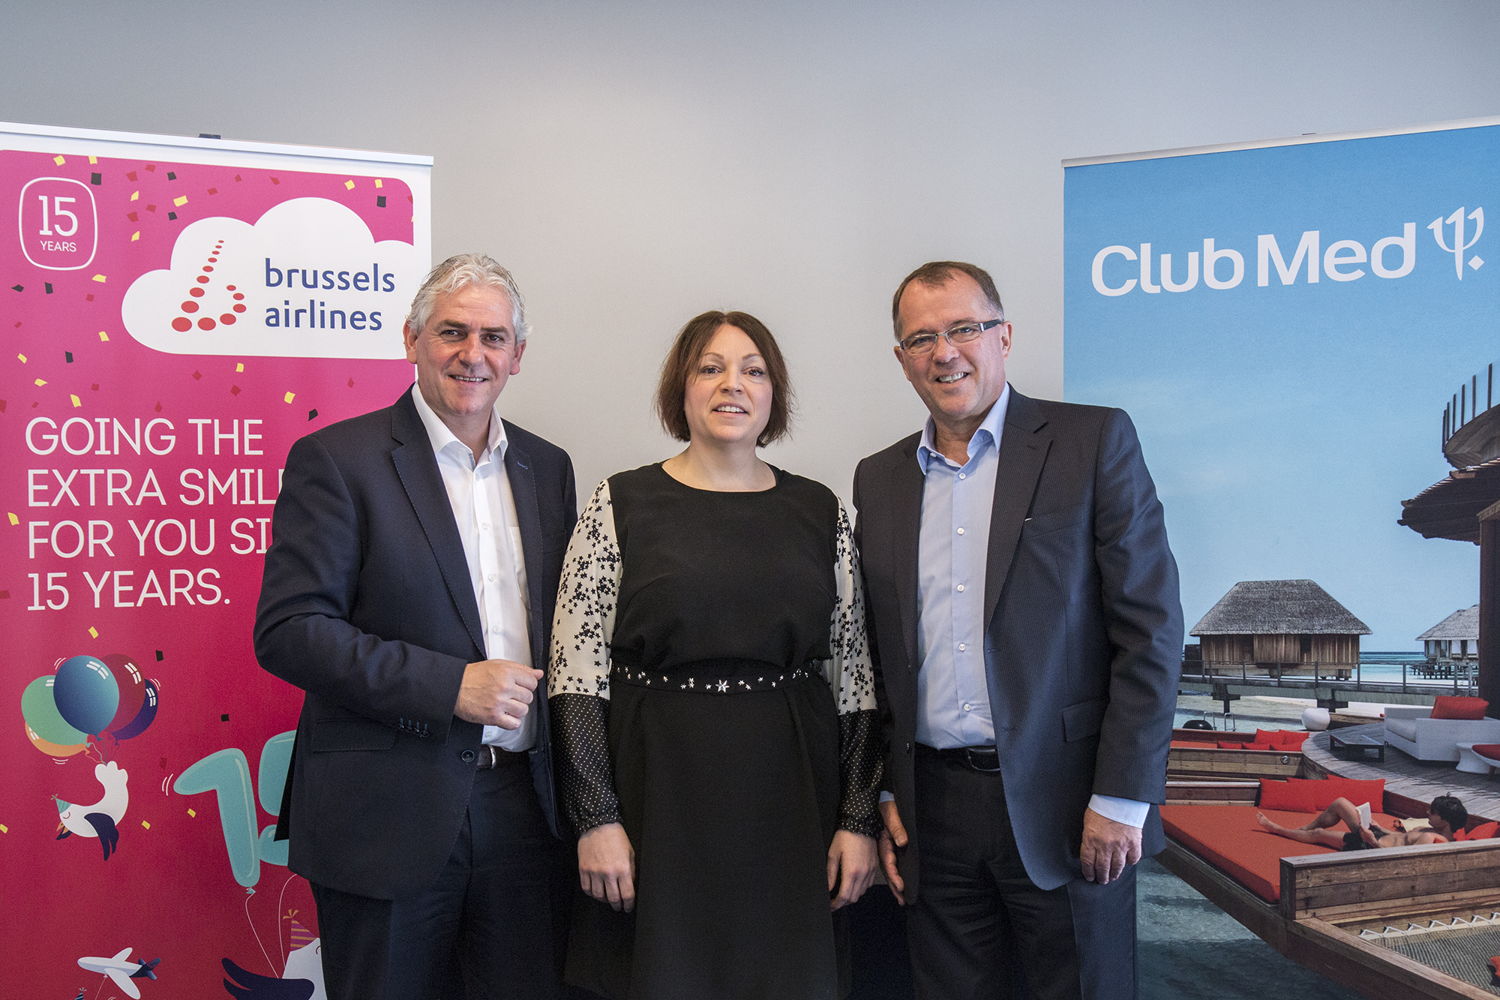 Frédéric Dechamps (VP Sales Benelux Brussels Airlines), Christina Foerster (Chief Commercial Officer Brussels Airlines)  en Eric Georges (Managing Director Club Med Benelux)

